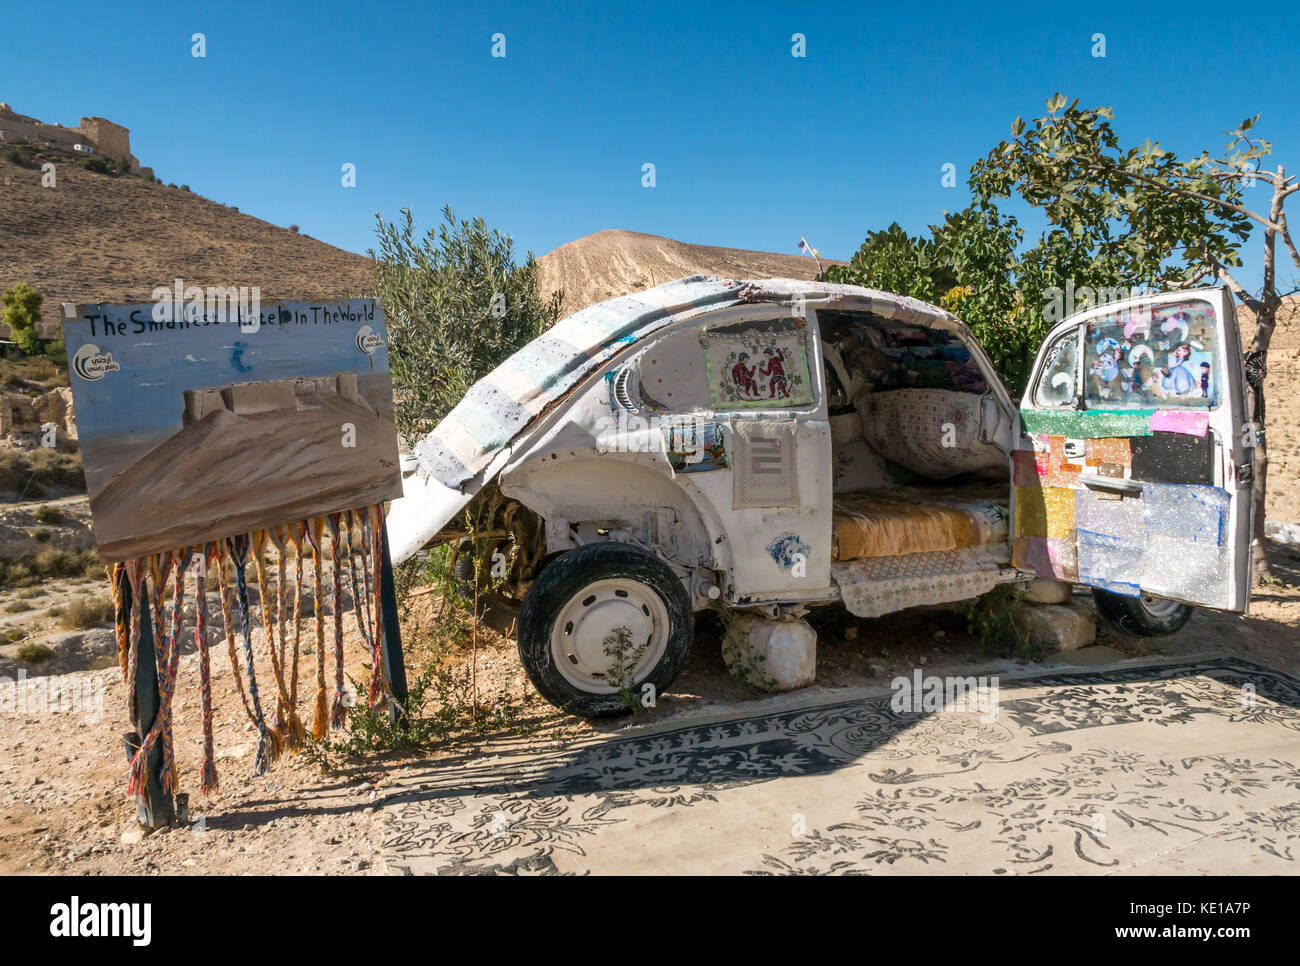 Humorous advert for the smallest hotel in the world, old vintage small car converted to a bed with Shoubak Castle, Jordan, Middle East Stock Photo